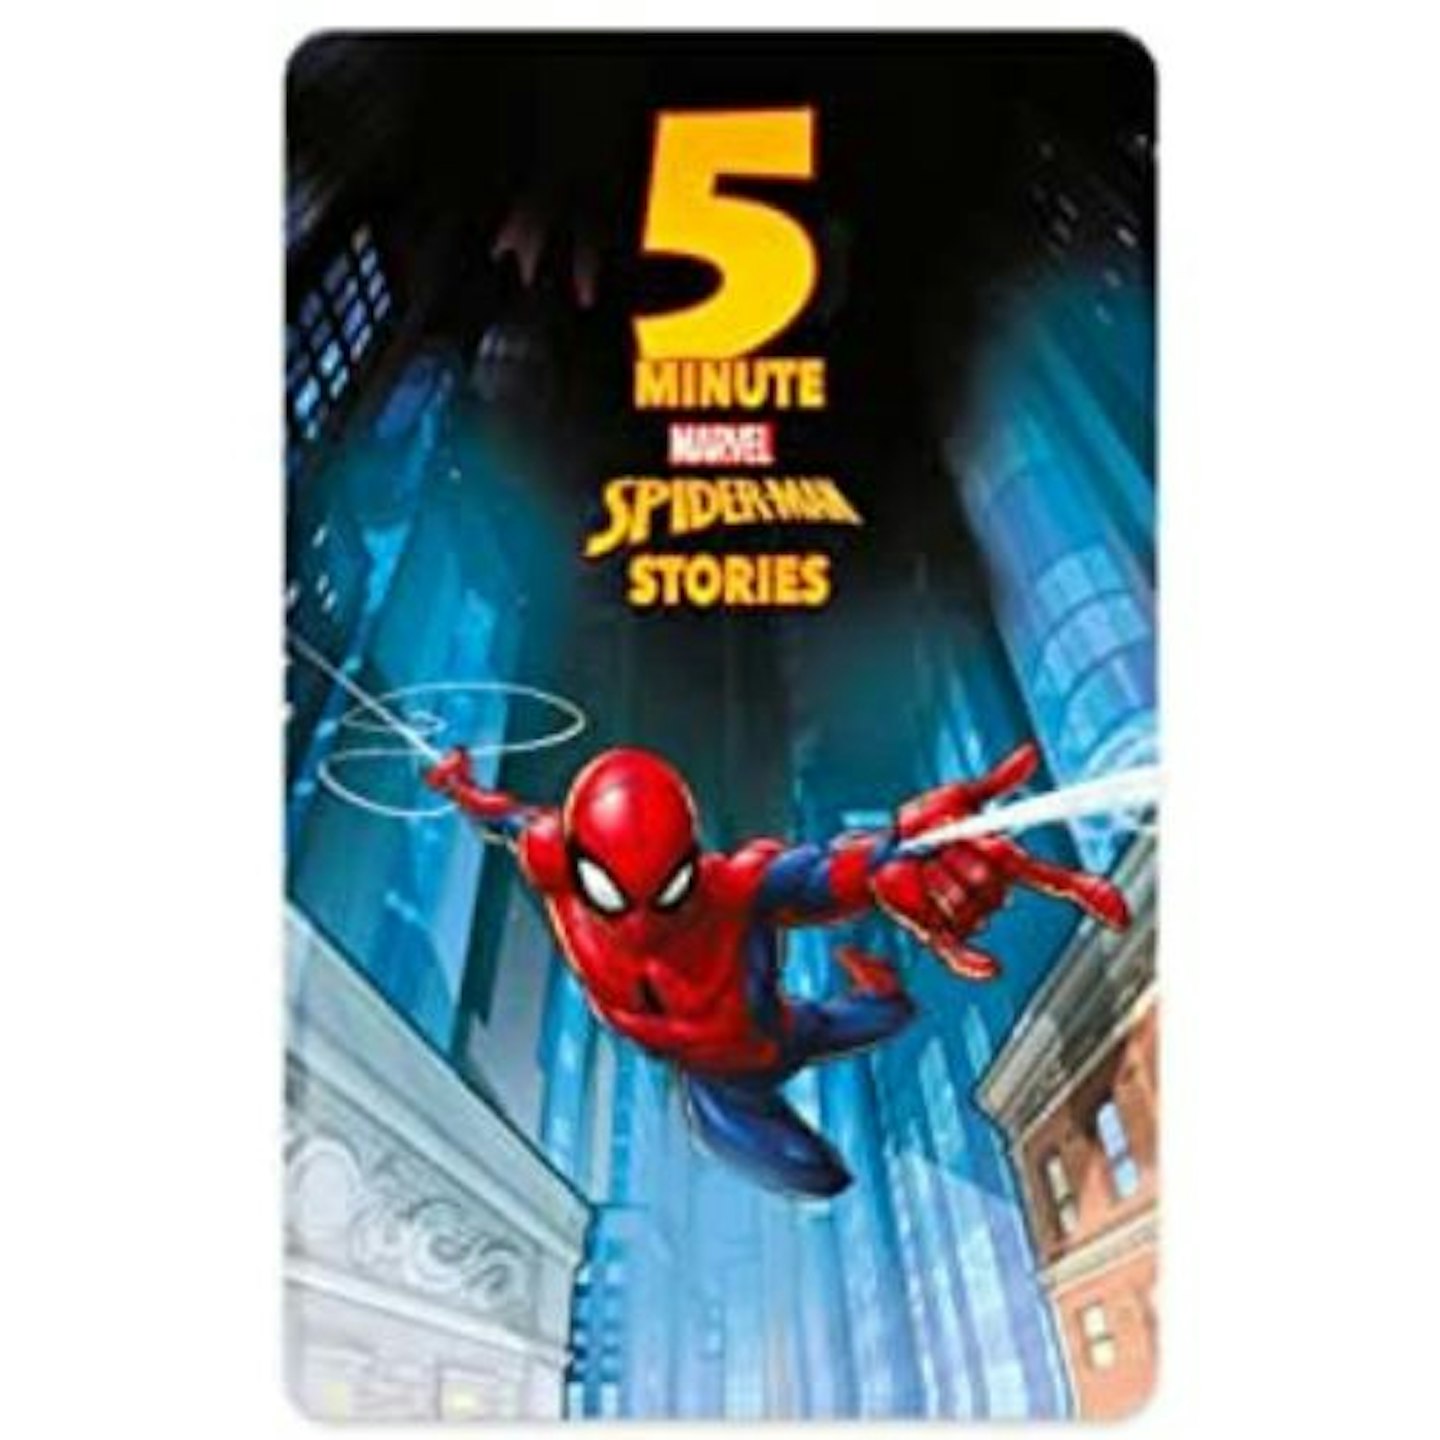 Best Yoto Player story cards Yoto Player MARVEL 5 MINUTE STORIES: SPIDER-MAN STORIES